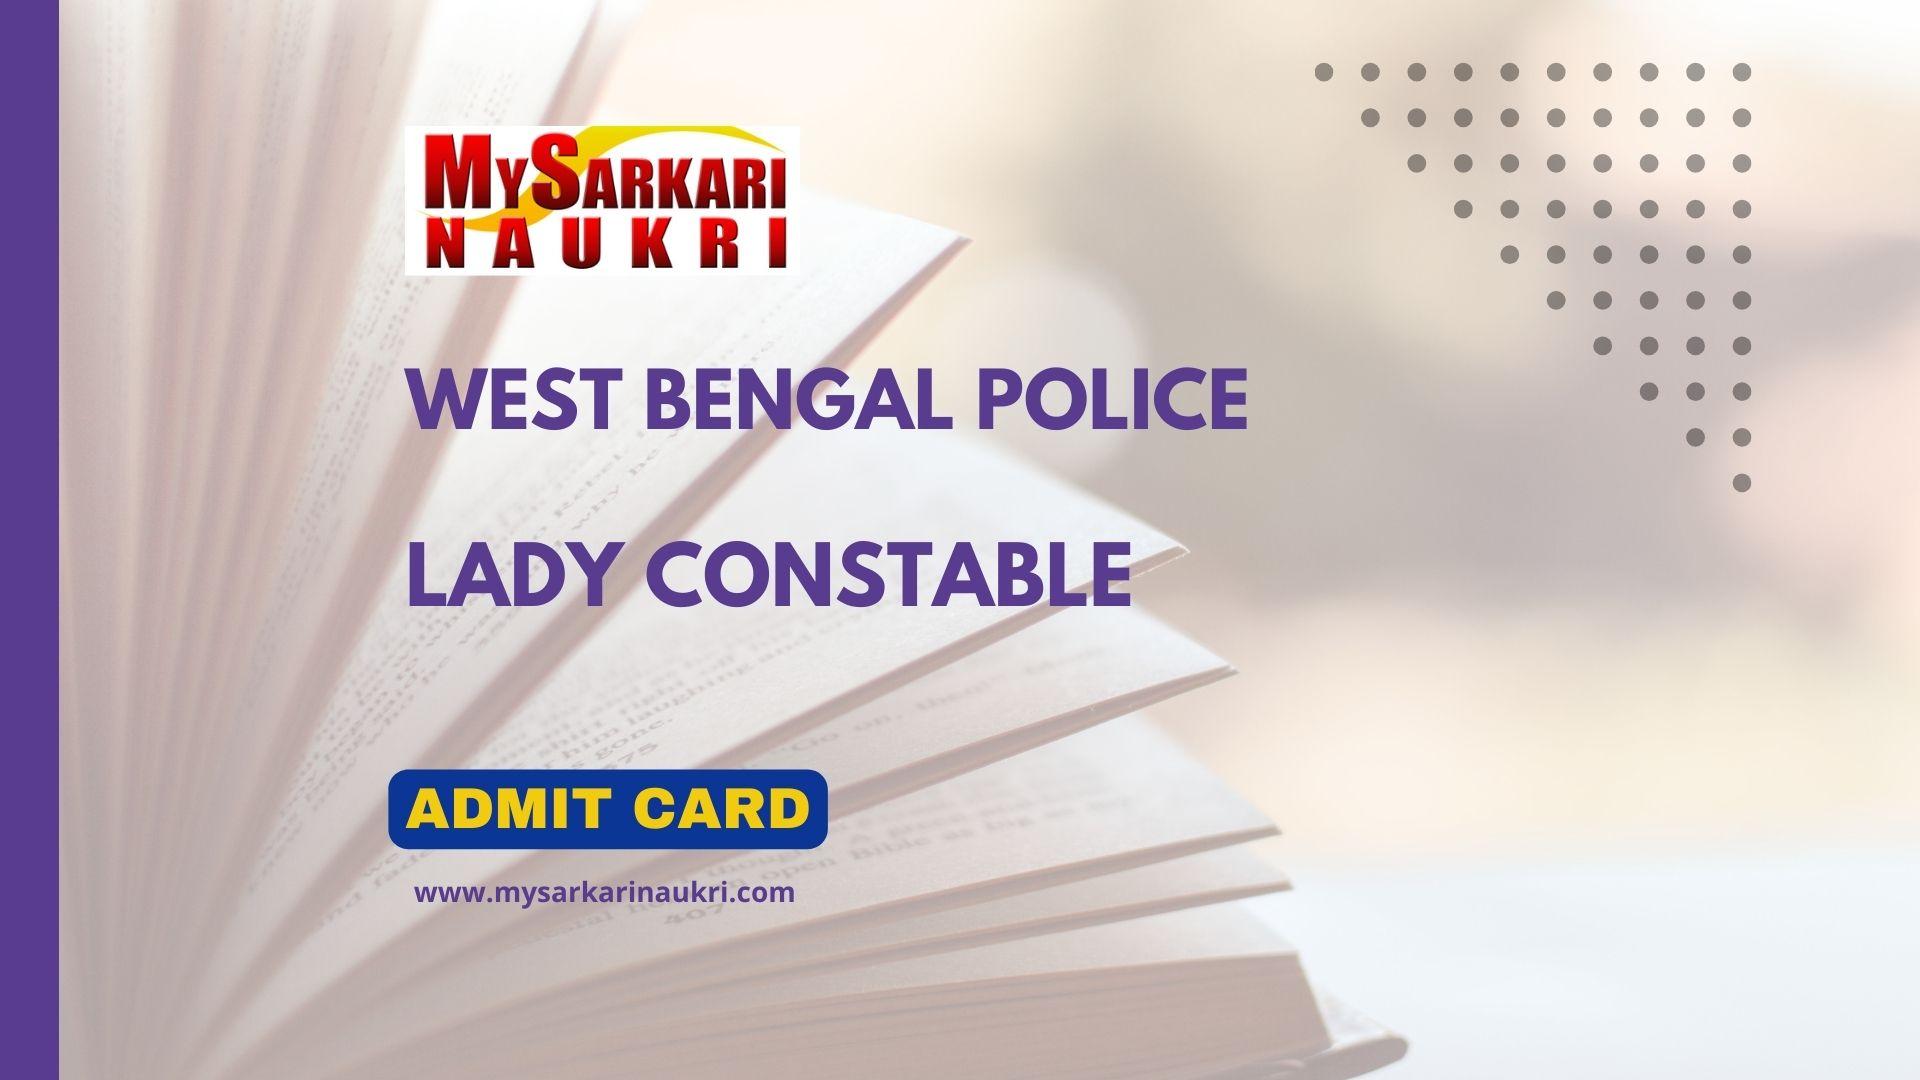 West Bengal Lady Constable Admit Card